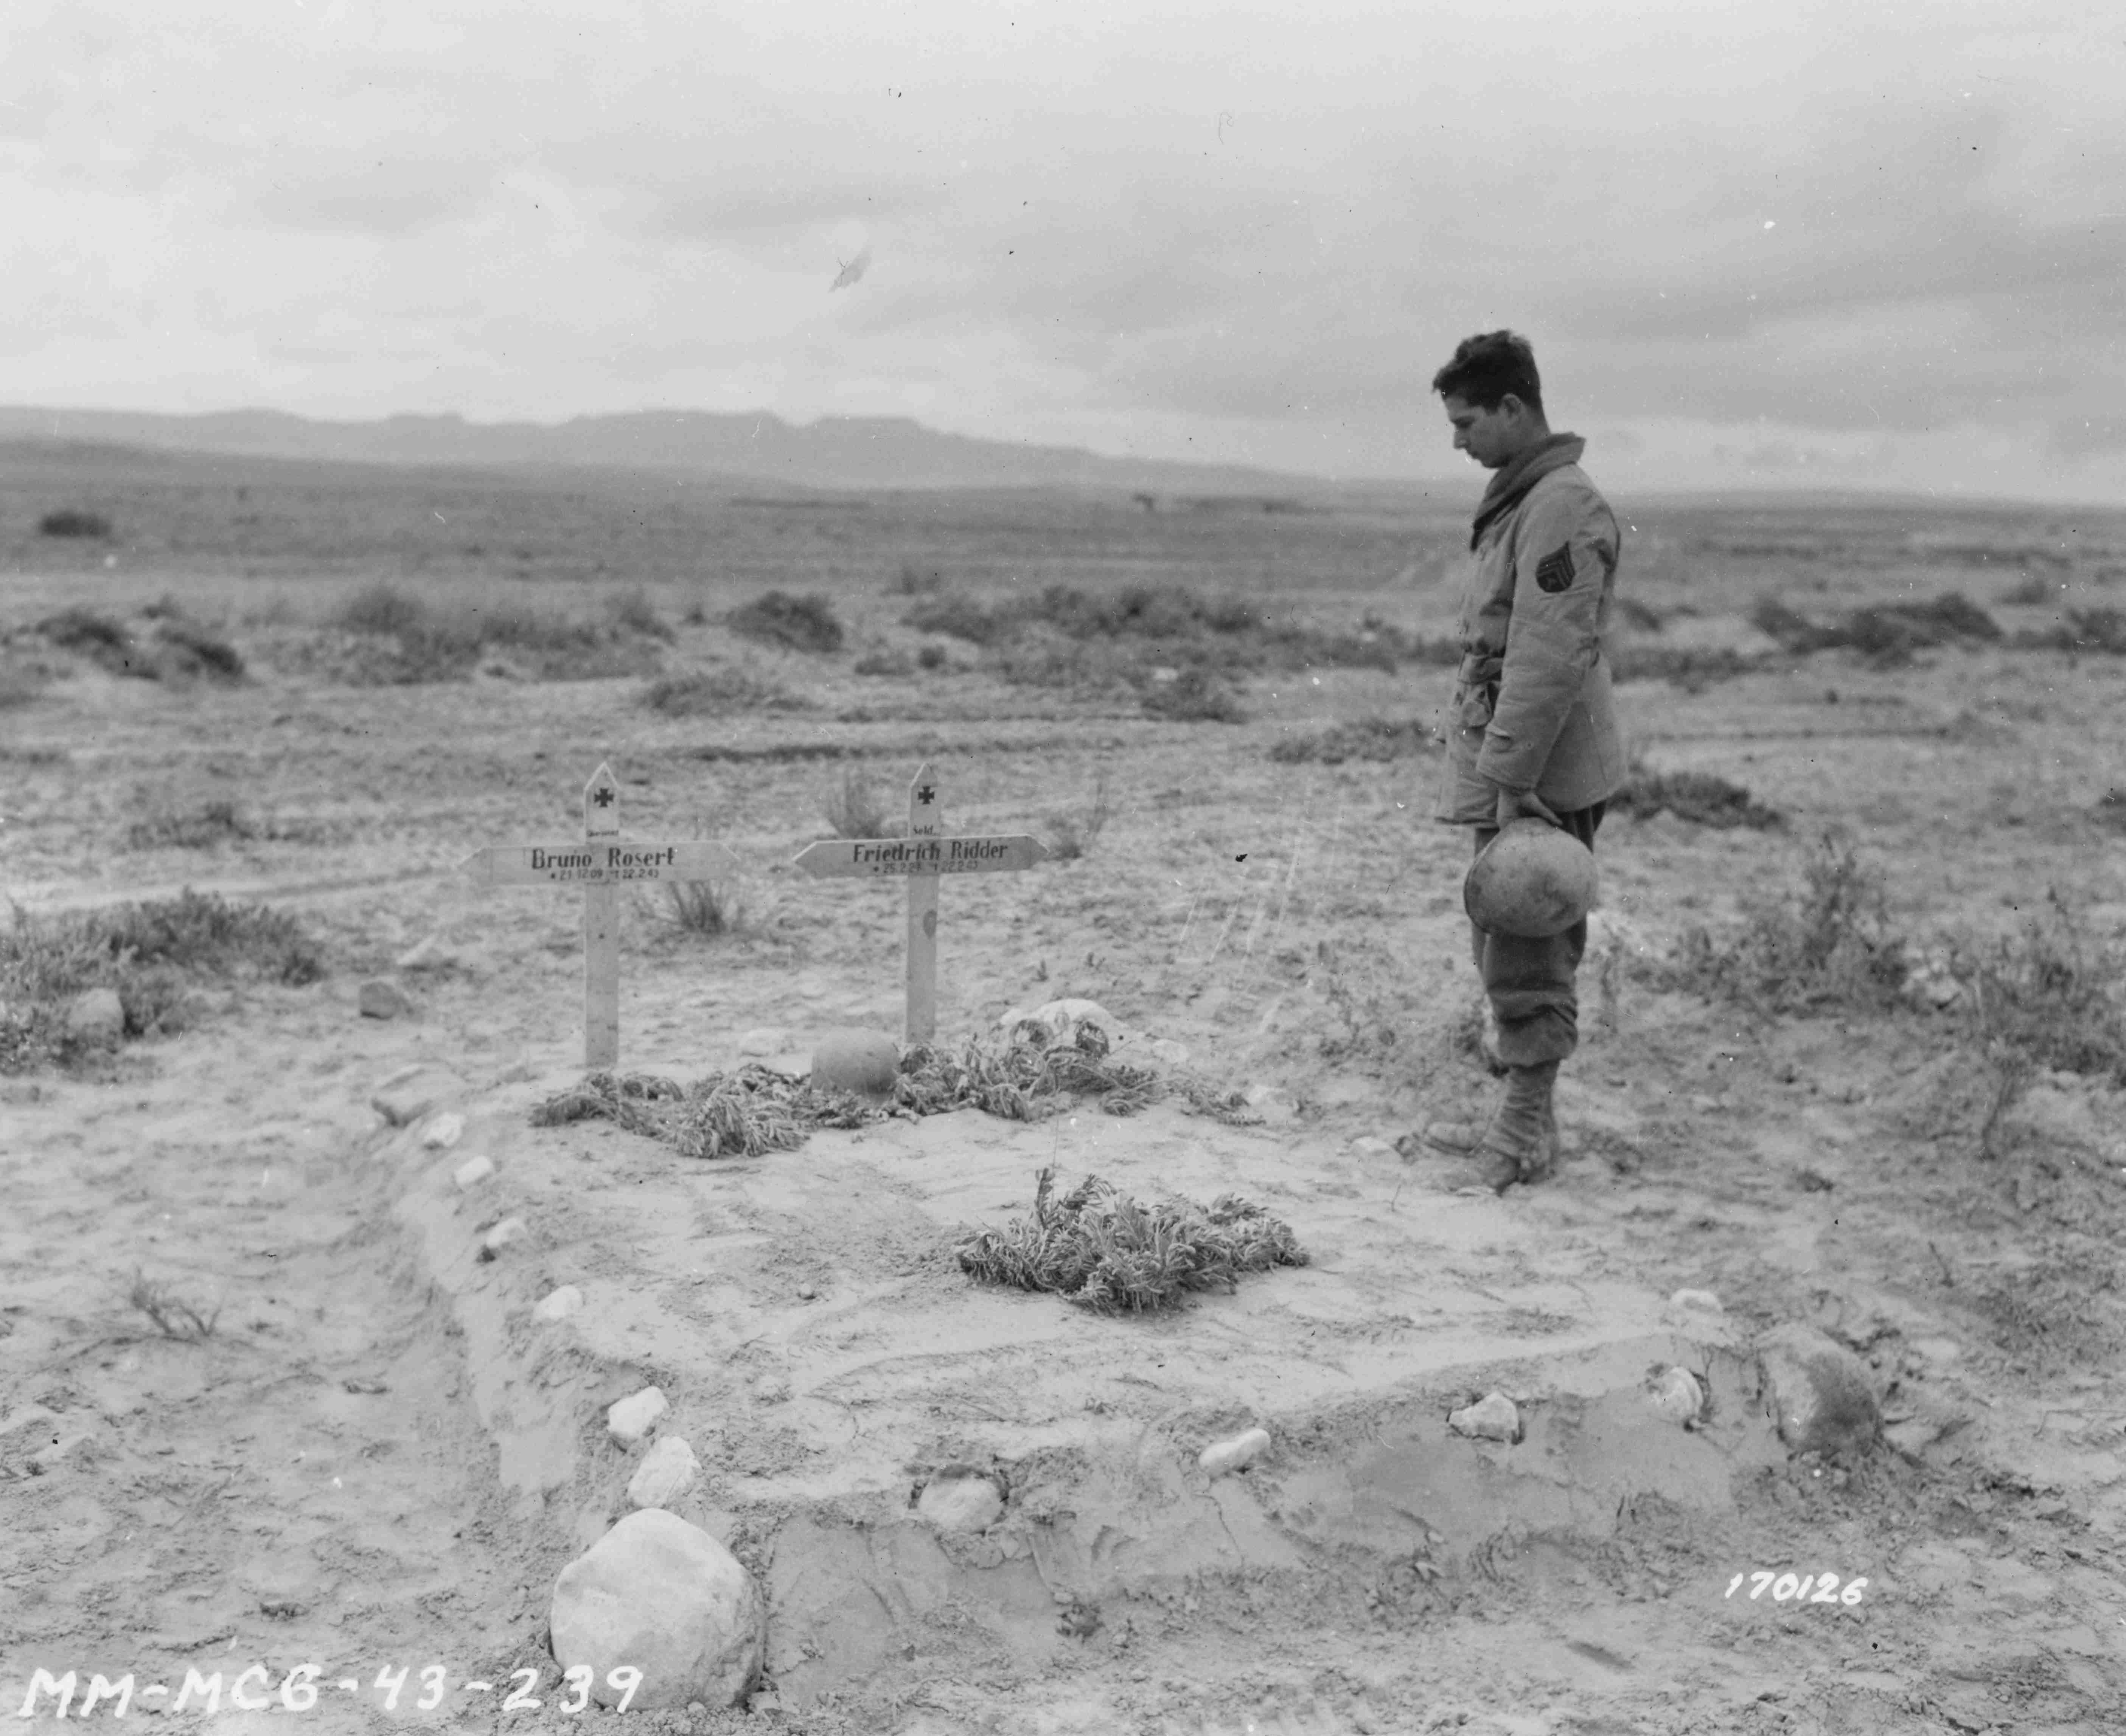 U.S. Army Sgt. T. B. Haber stands by the graves of two German soldiers killed during the Battle of Kasserine Pass in Tunisia. 26 February 1943 [5620 × 4590]